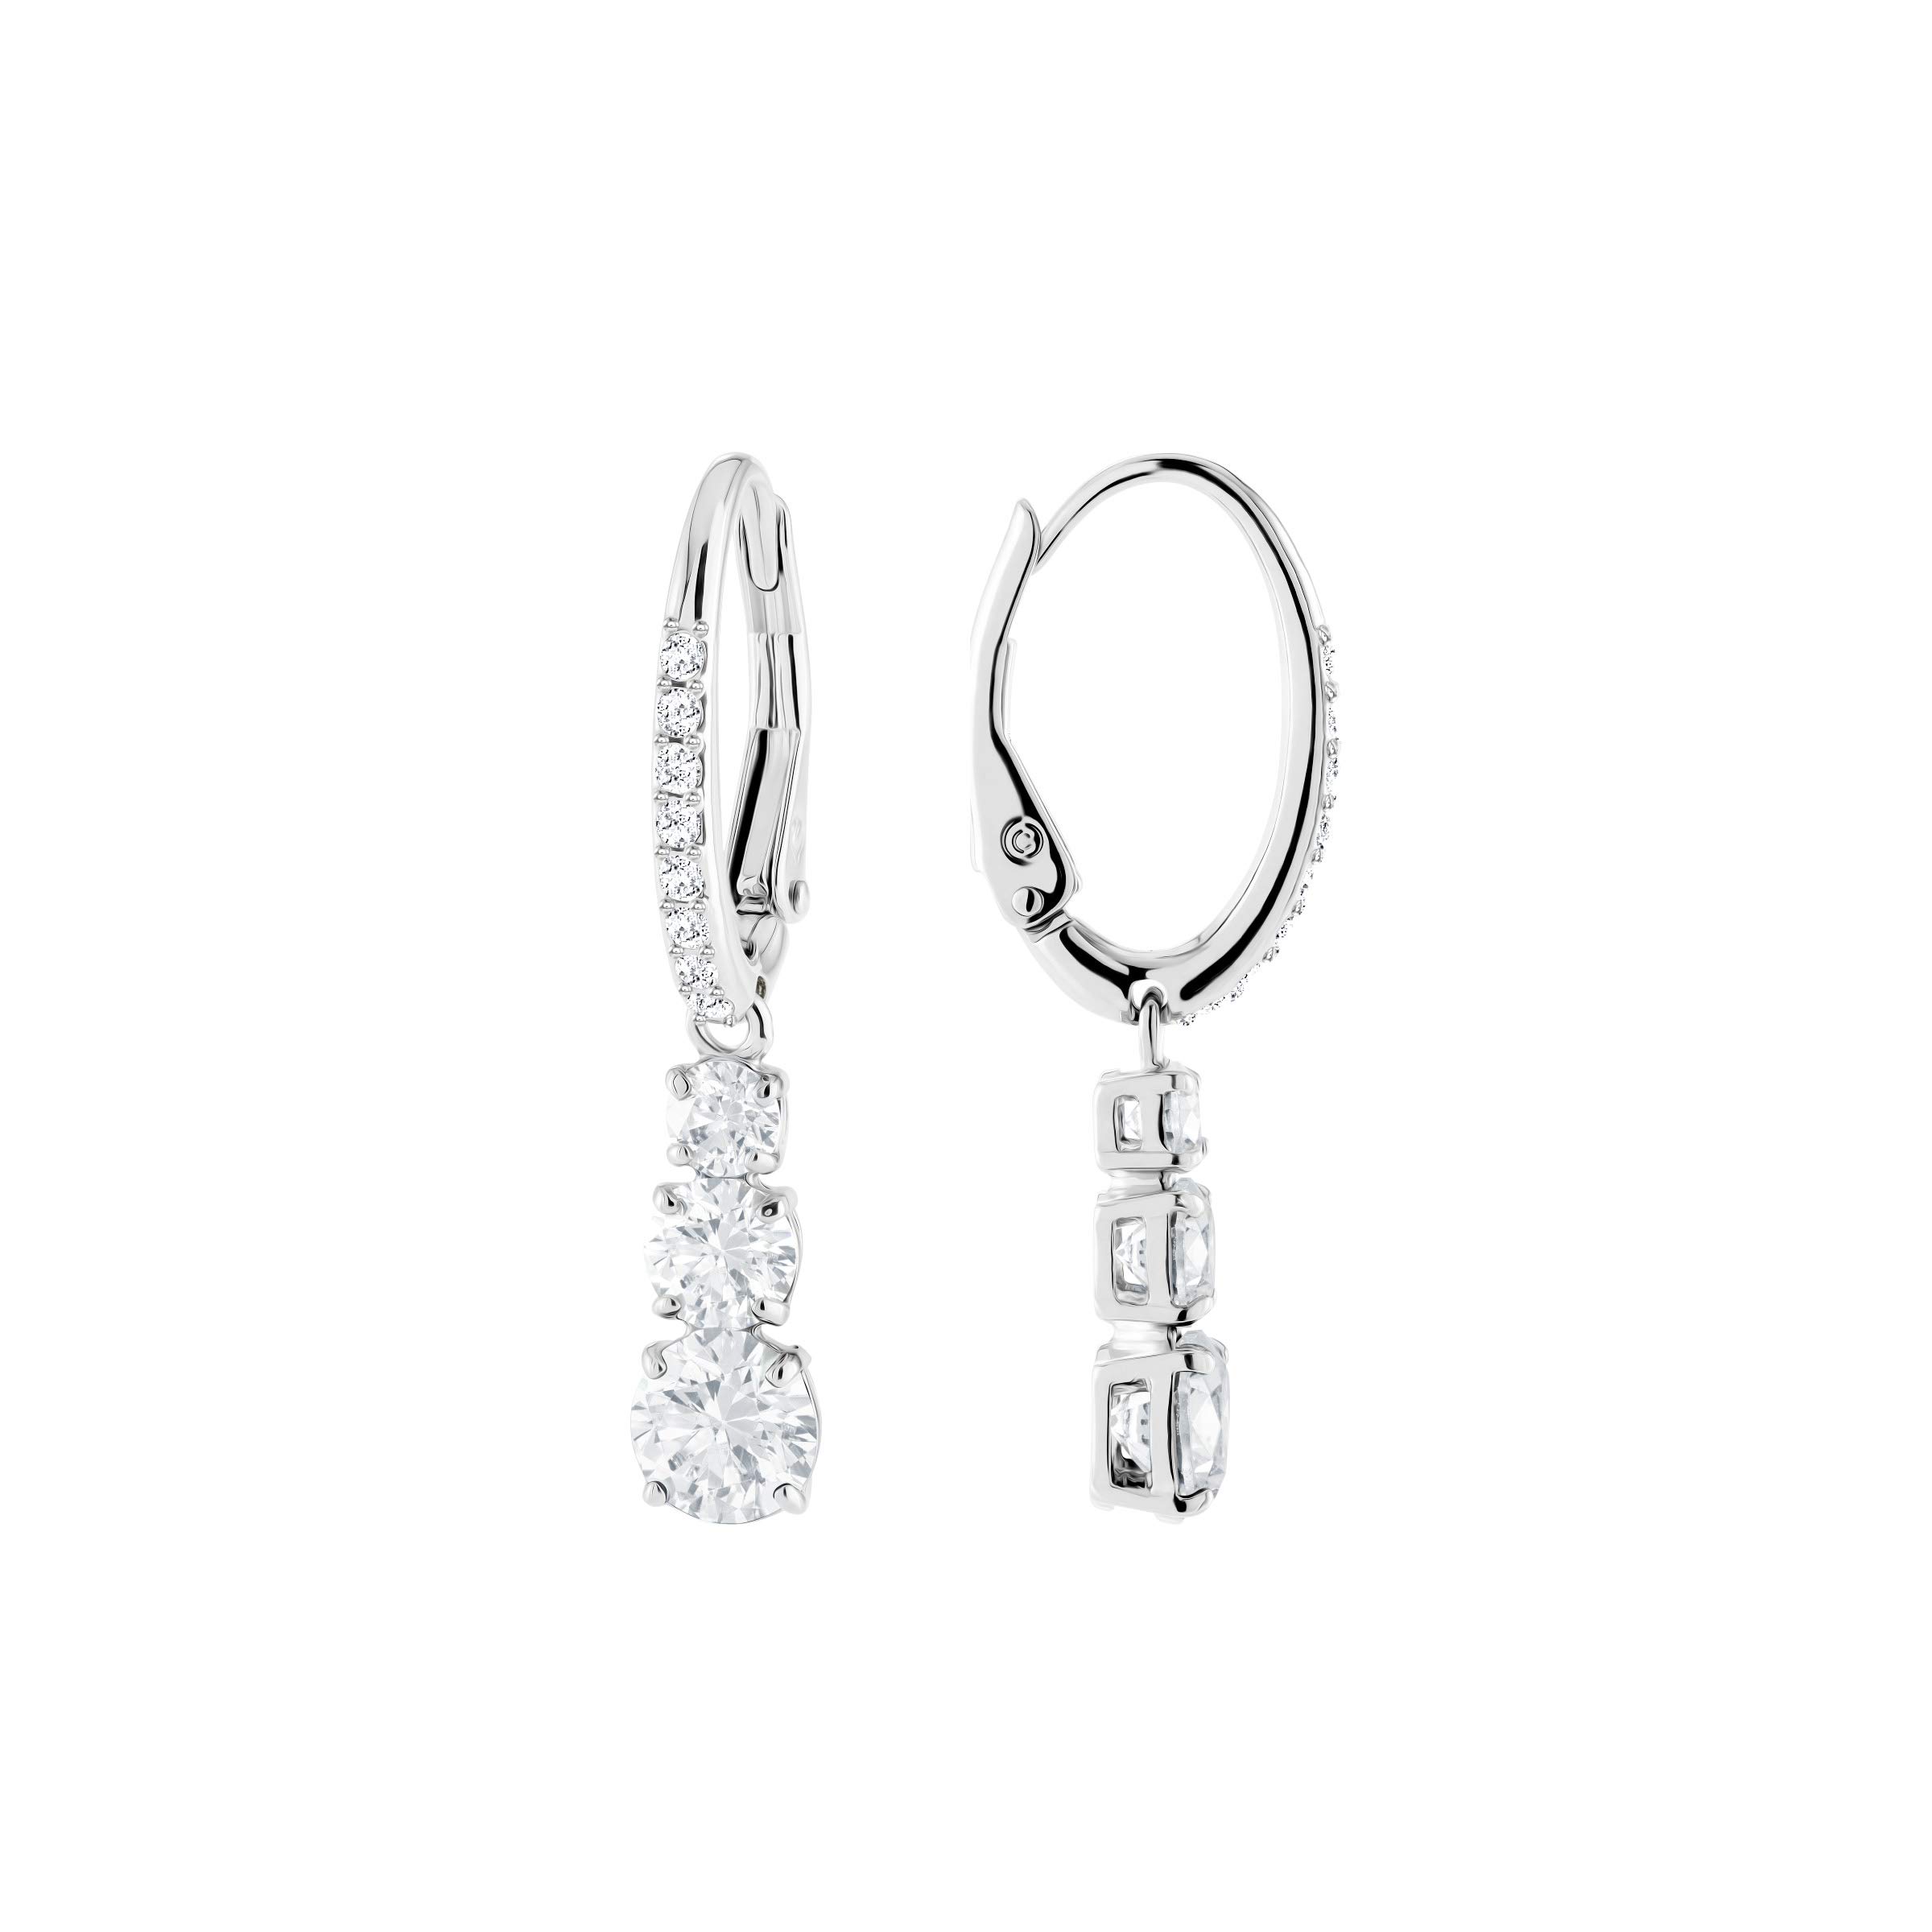 Swarovski Attract Trilogy Crystal Necklace and Earrings Jewelry Collection